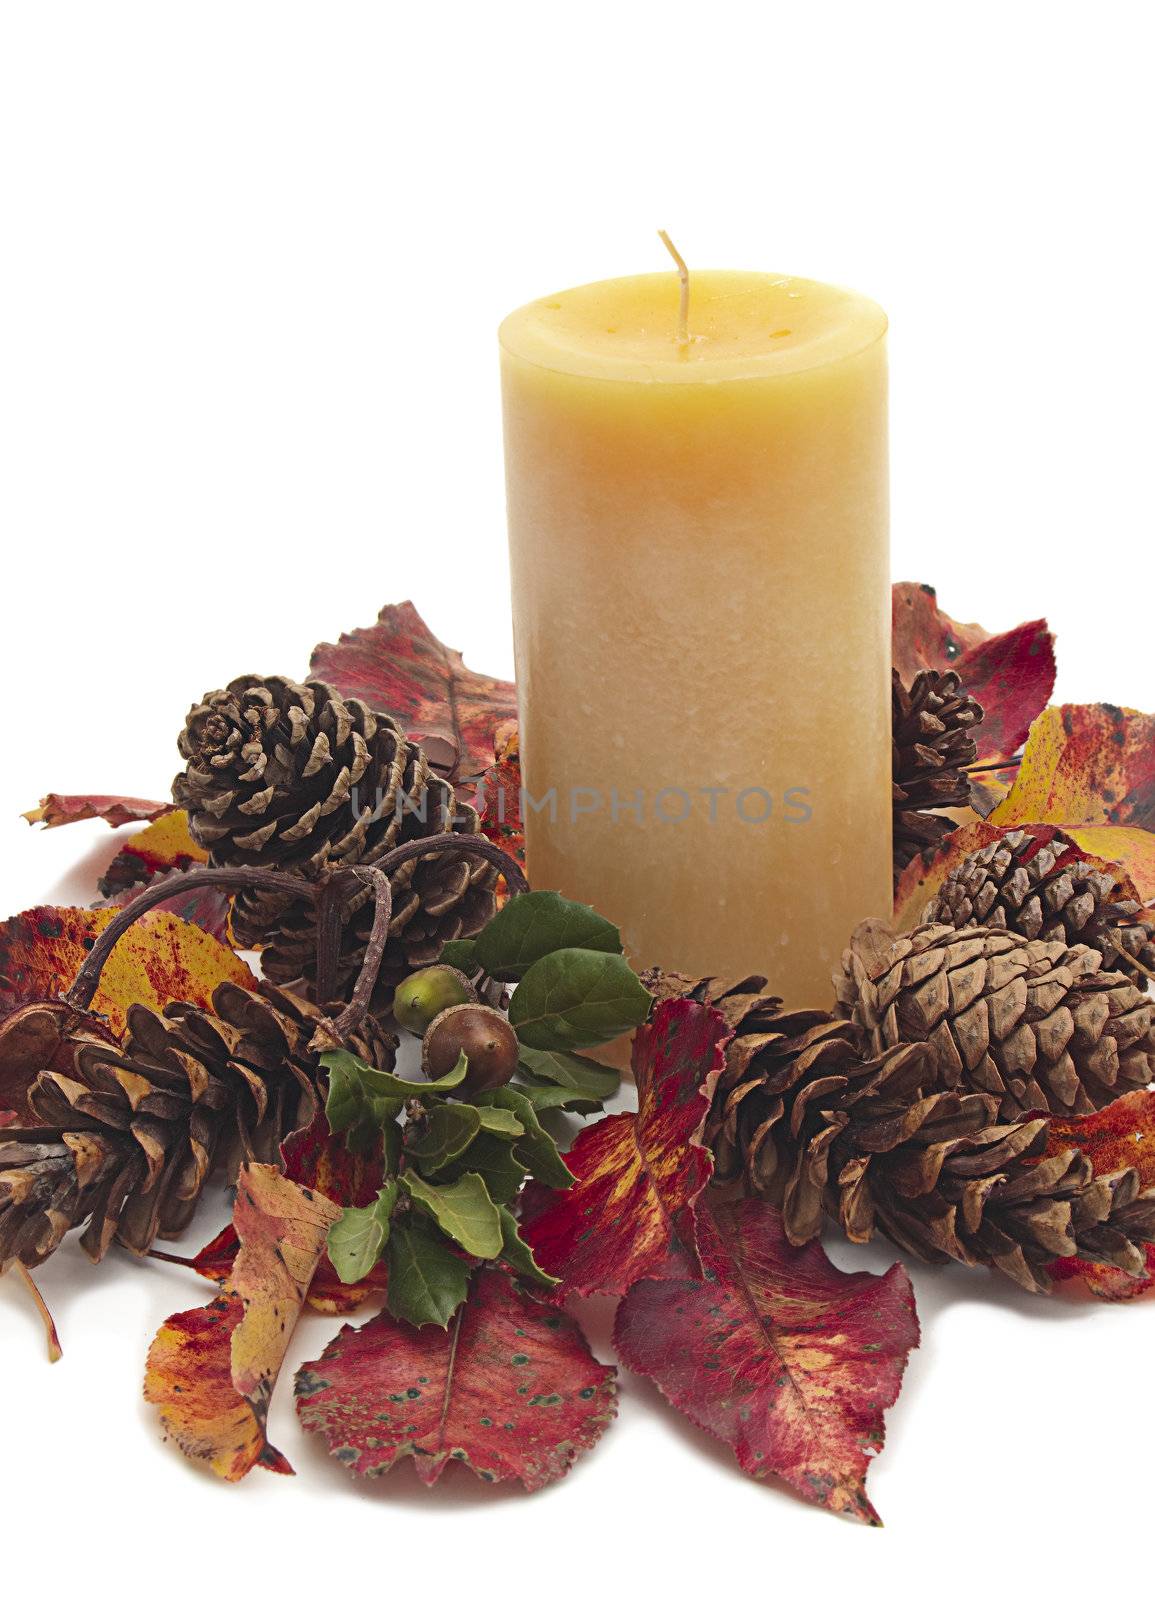 Yellow pillar candle surrounded by Fall pine cones, red and yellow leaves, and acorn on white background.